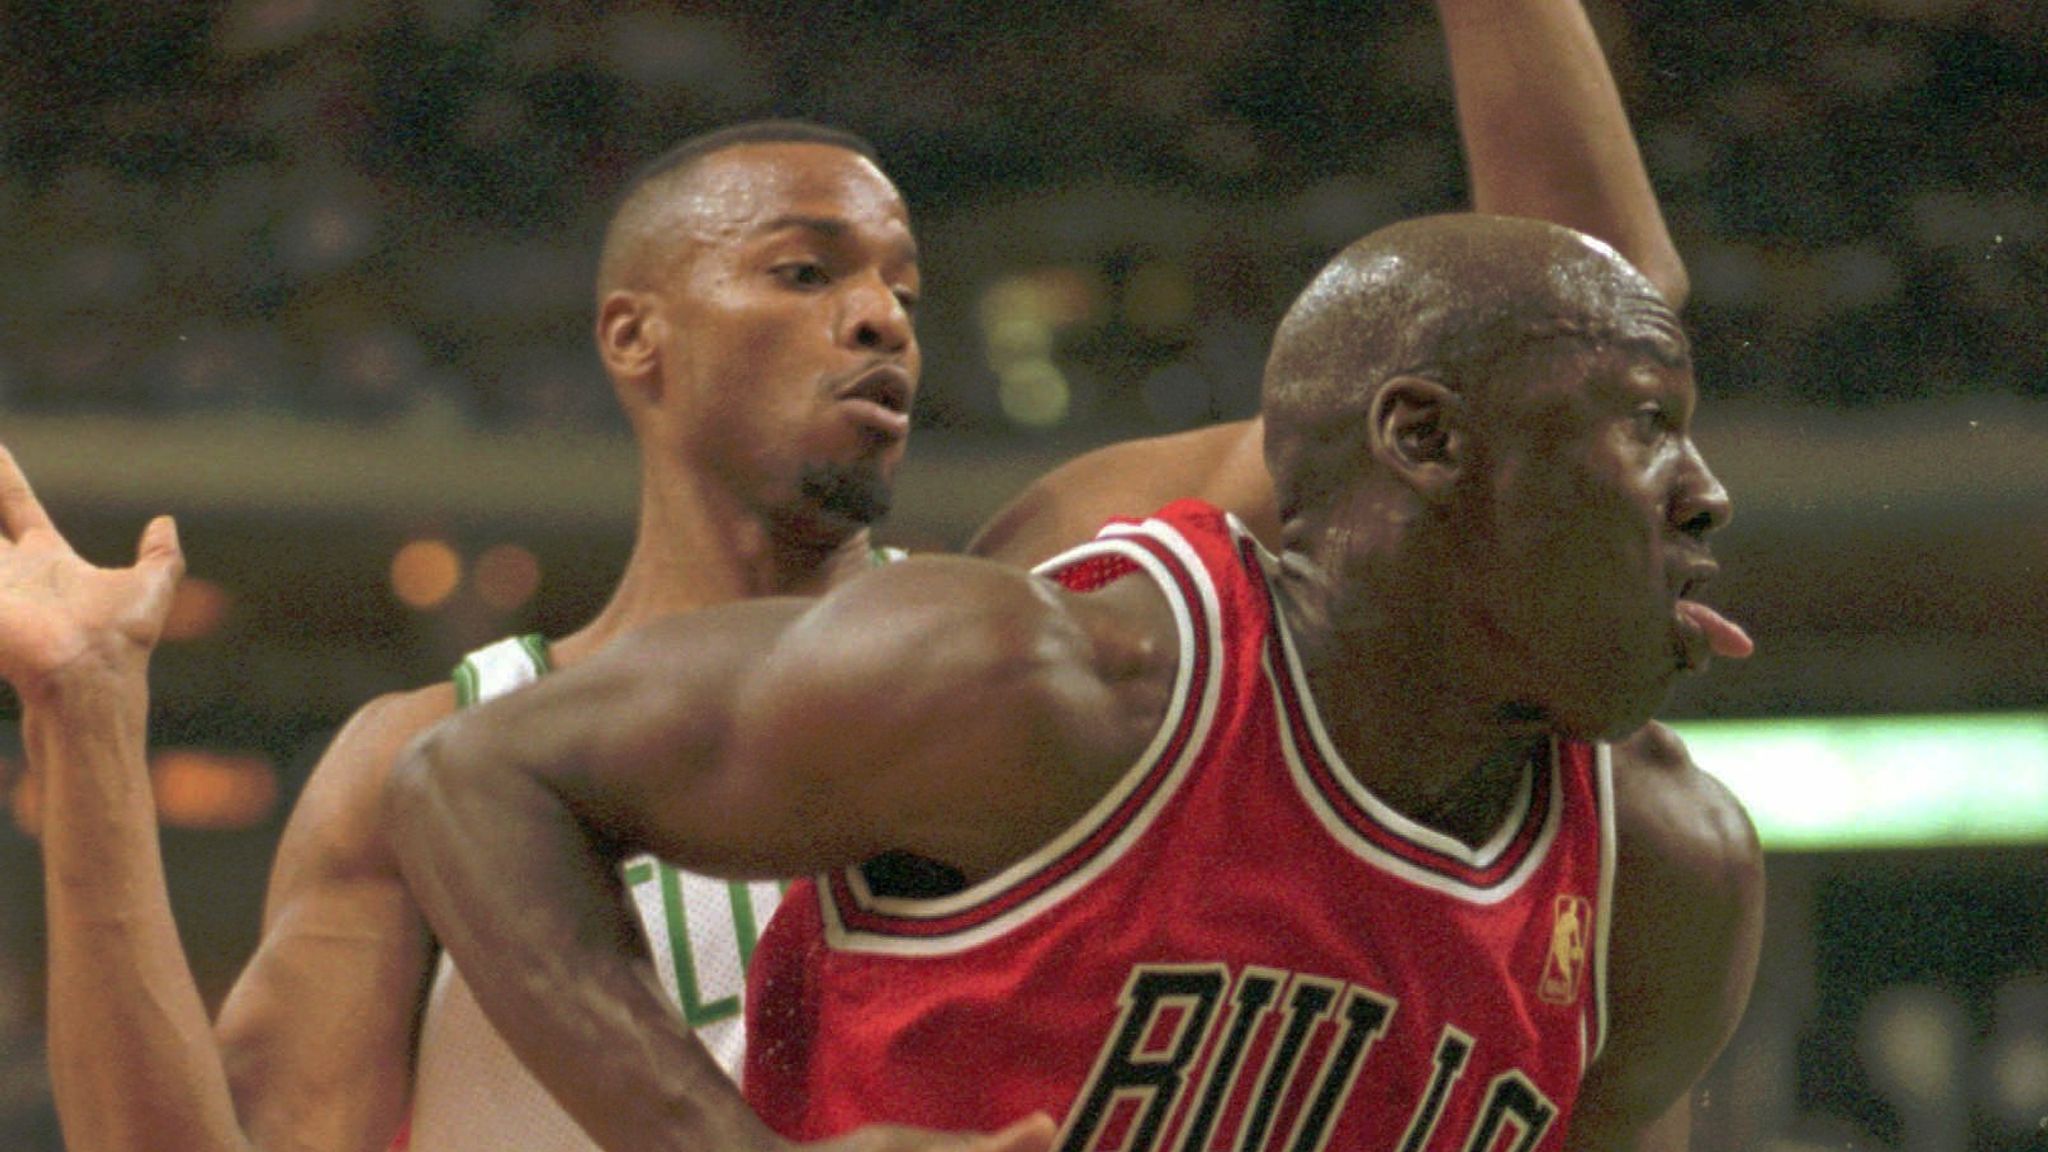 Where Are They Now? the 1996 Bulls